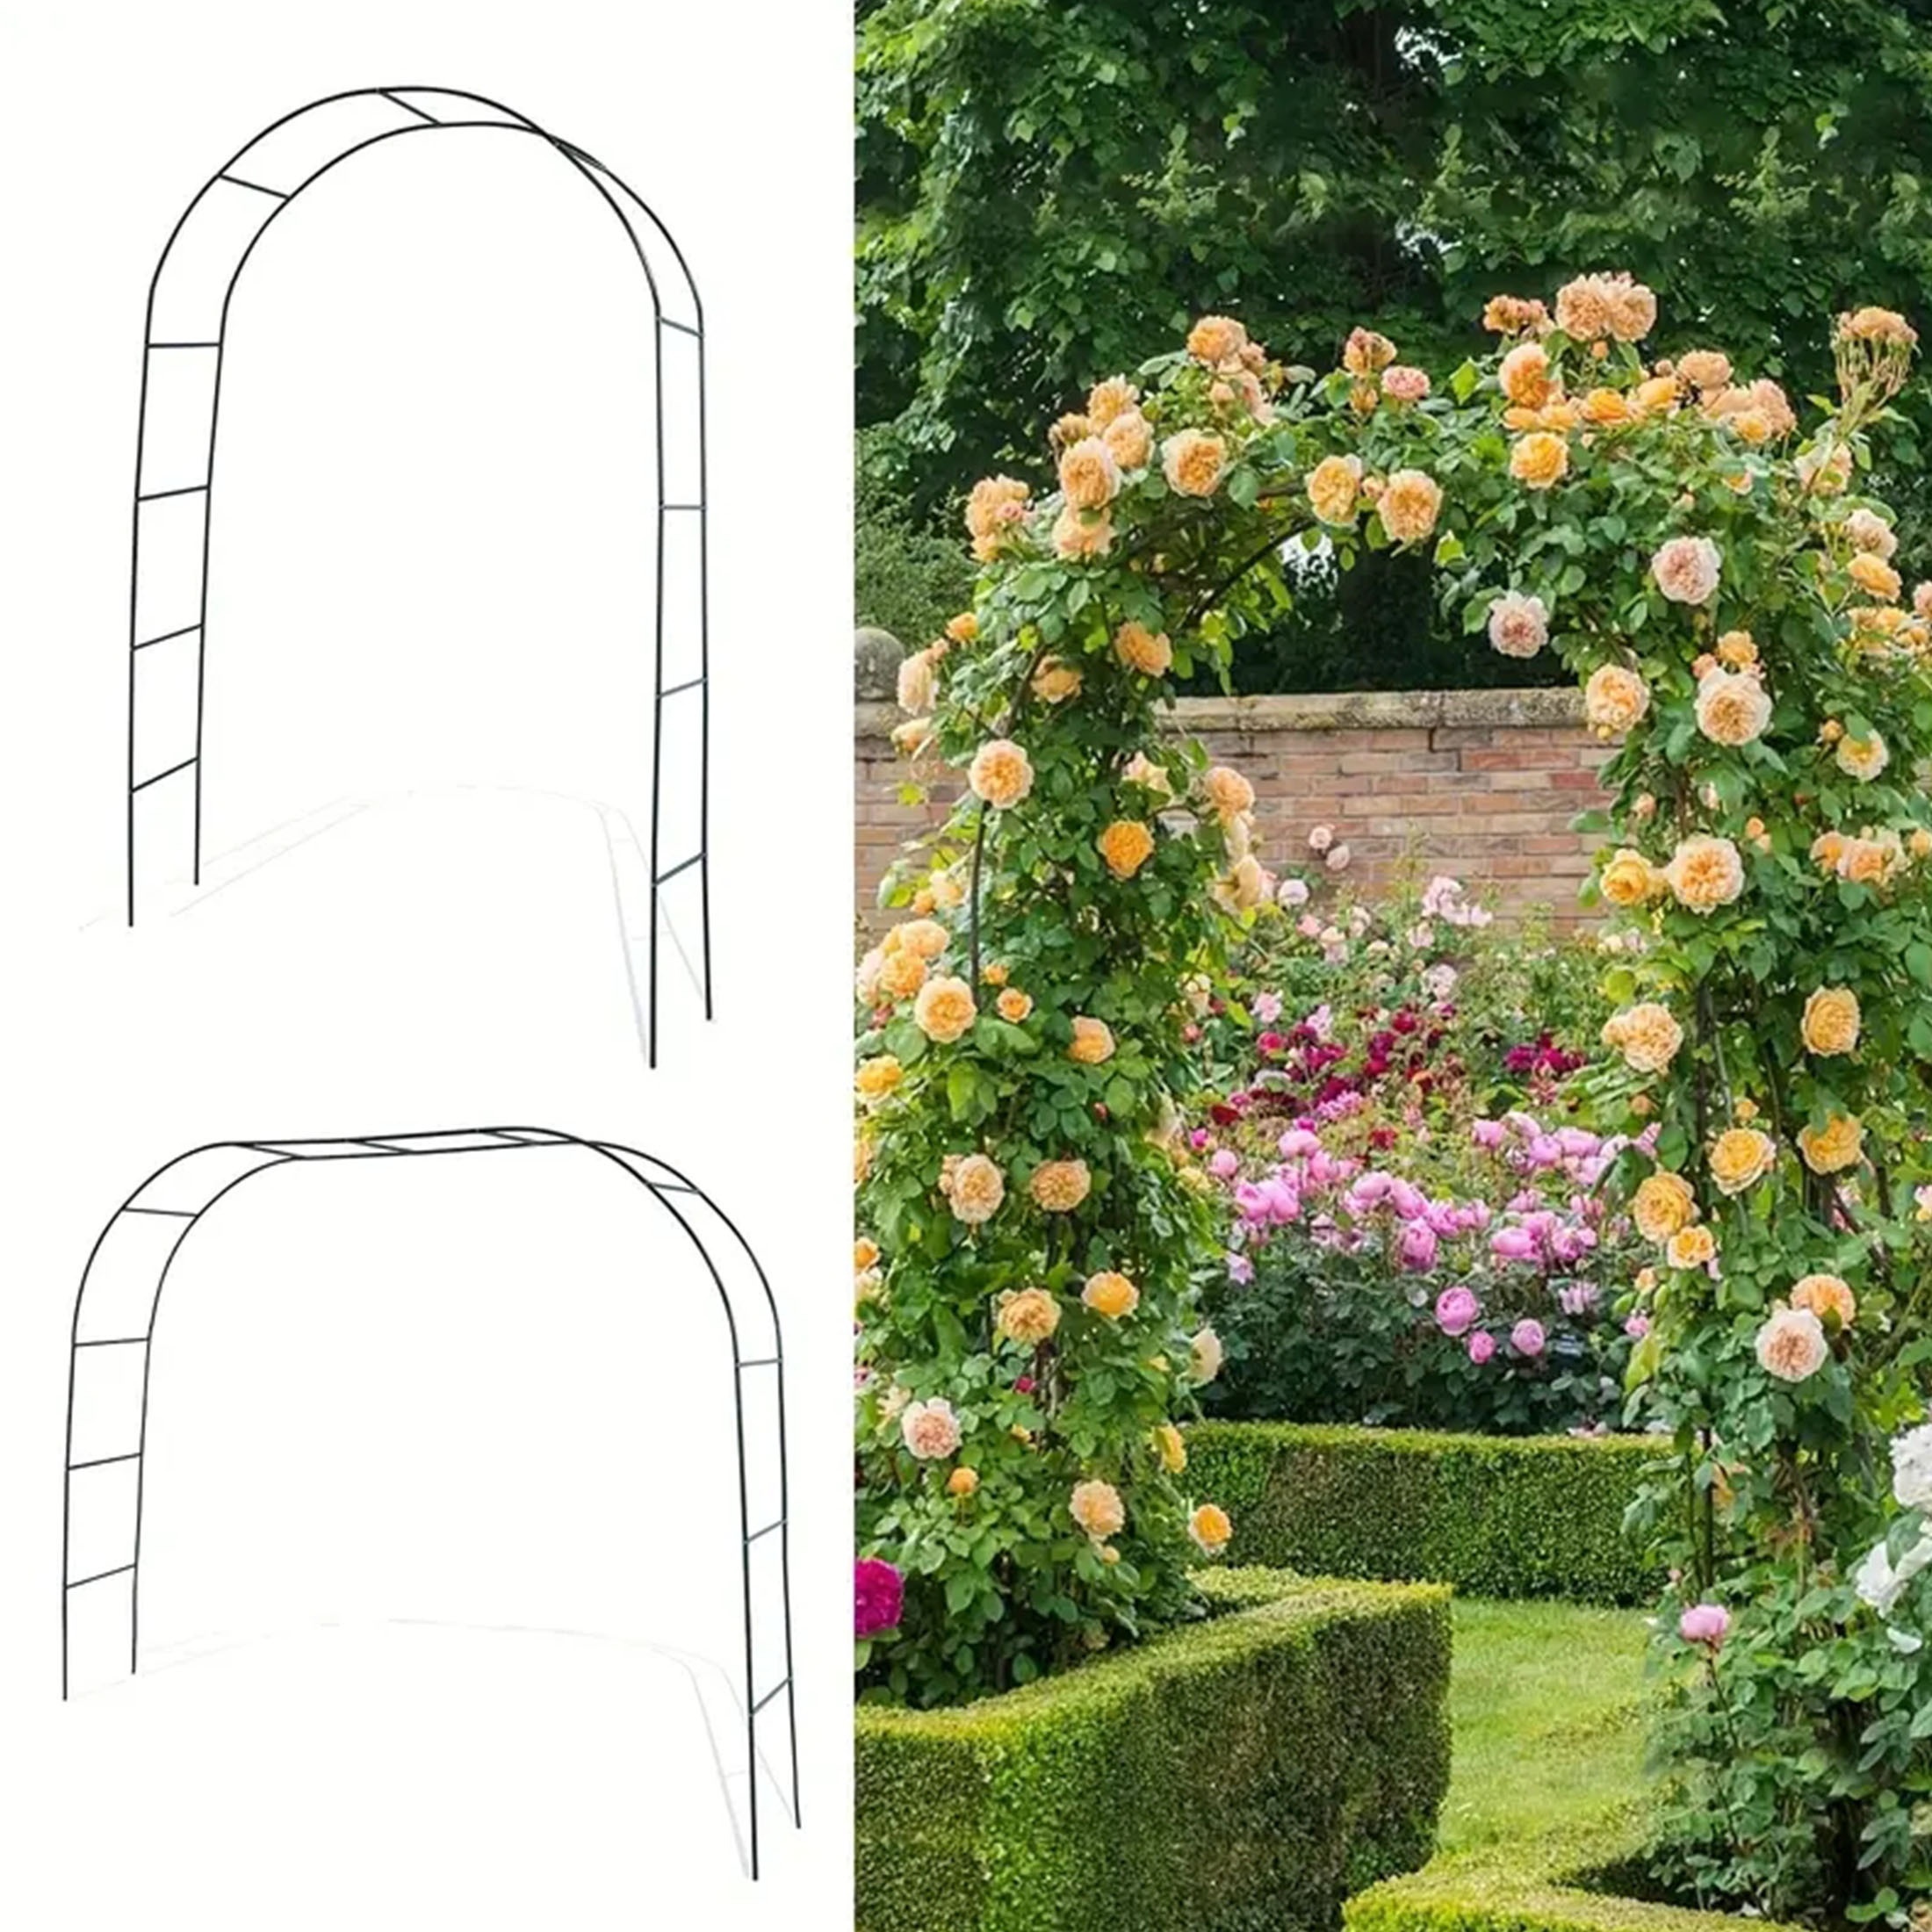 

1pc, Outdoor Garden Arch For Wedding Decoration, Made Of Silk Gourd And Climbing Roses, Used As A Plant Support For Climbing Vines And Grapevines In Outdoor Courtyards